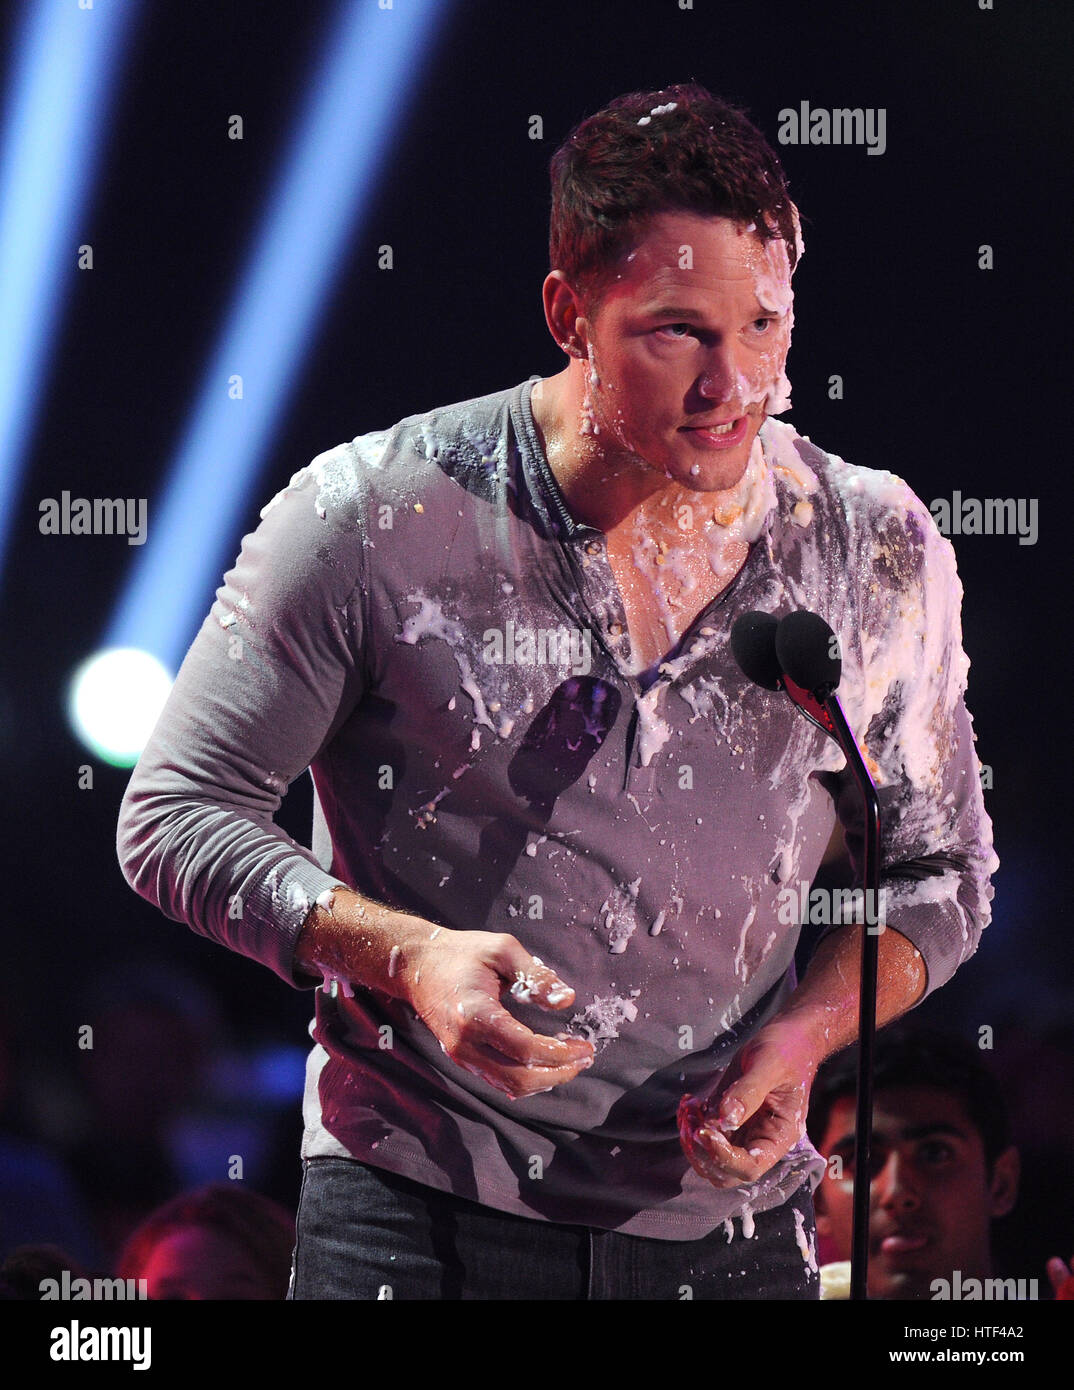 INGLEWOOD, CA - MARCH 28: Chris Pratt appears on the 28th Annual Nickelodeon Kids Choice Awards at the Forum on March 28, 2015 in Inglewood, California (Photo by ) Stock Photo